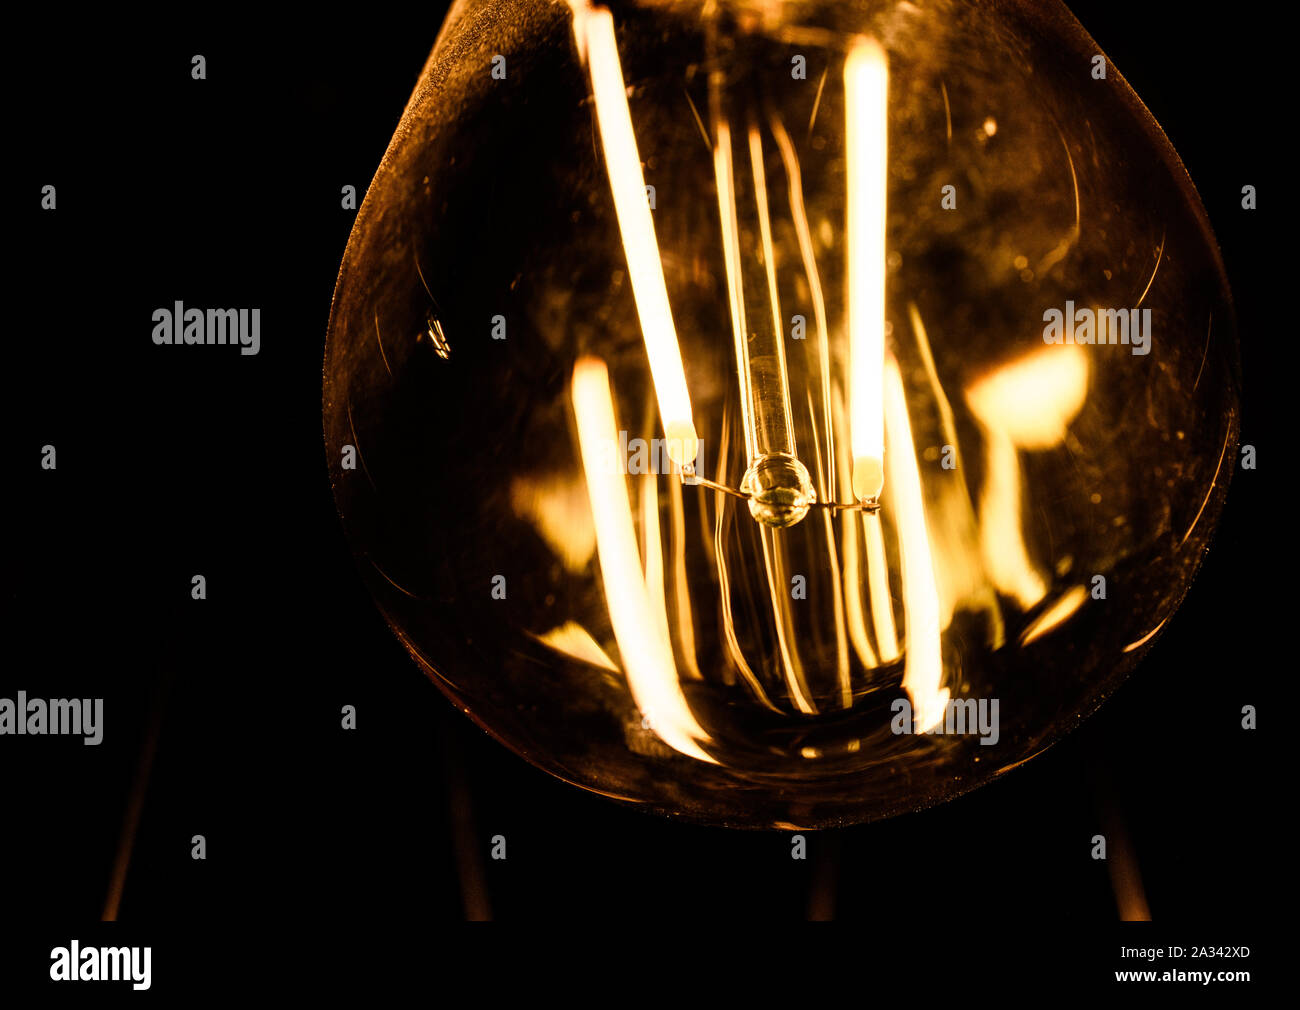 Closeup of Clear Retro Tungsten Light Bulb Isolated on Black Background Stock Photo